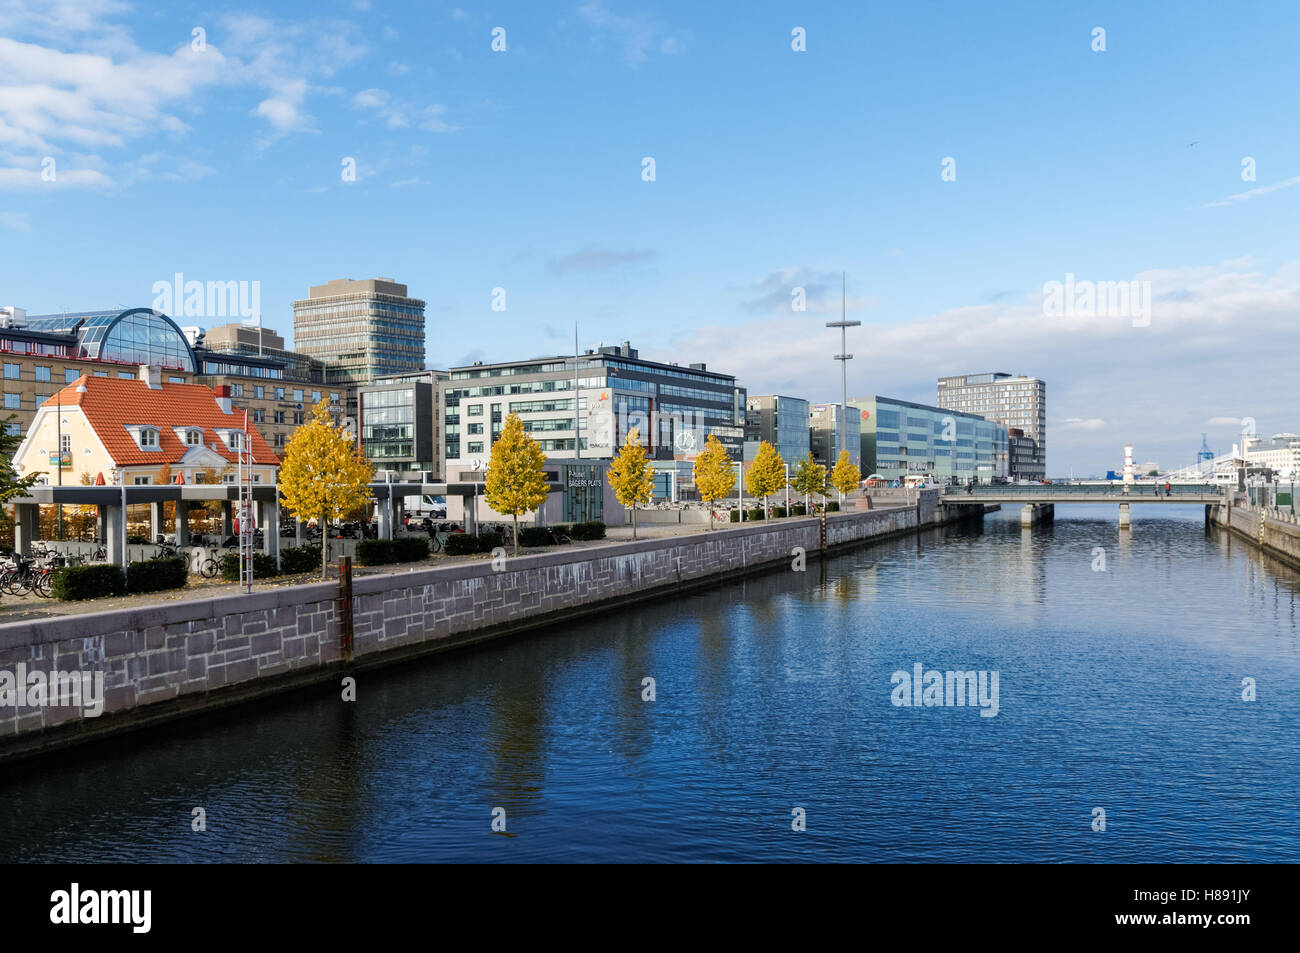 Malmo canals with Malmo University buildings, Sweden Stock Photo